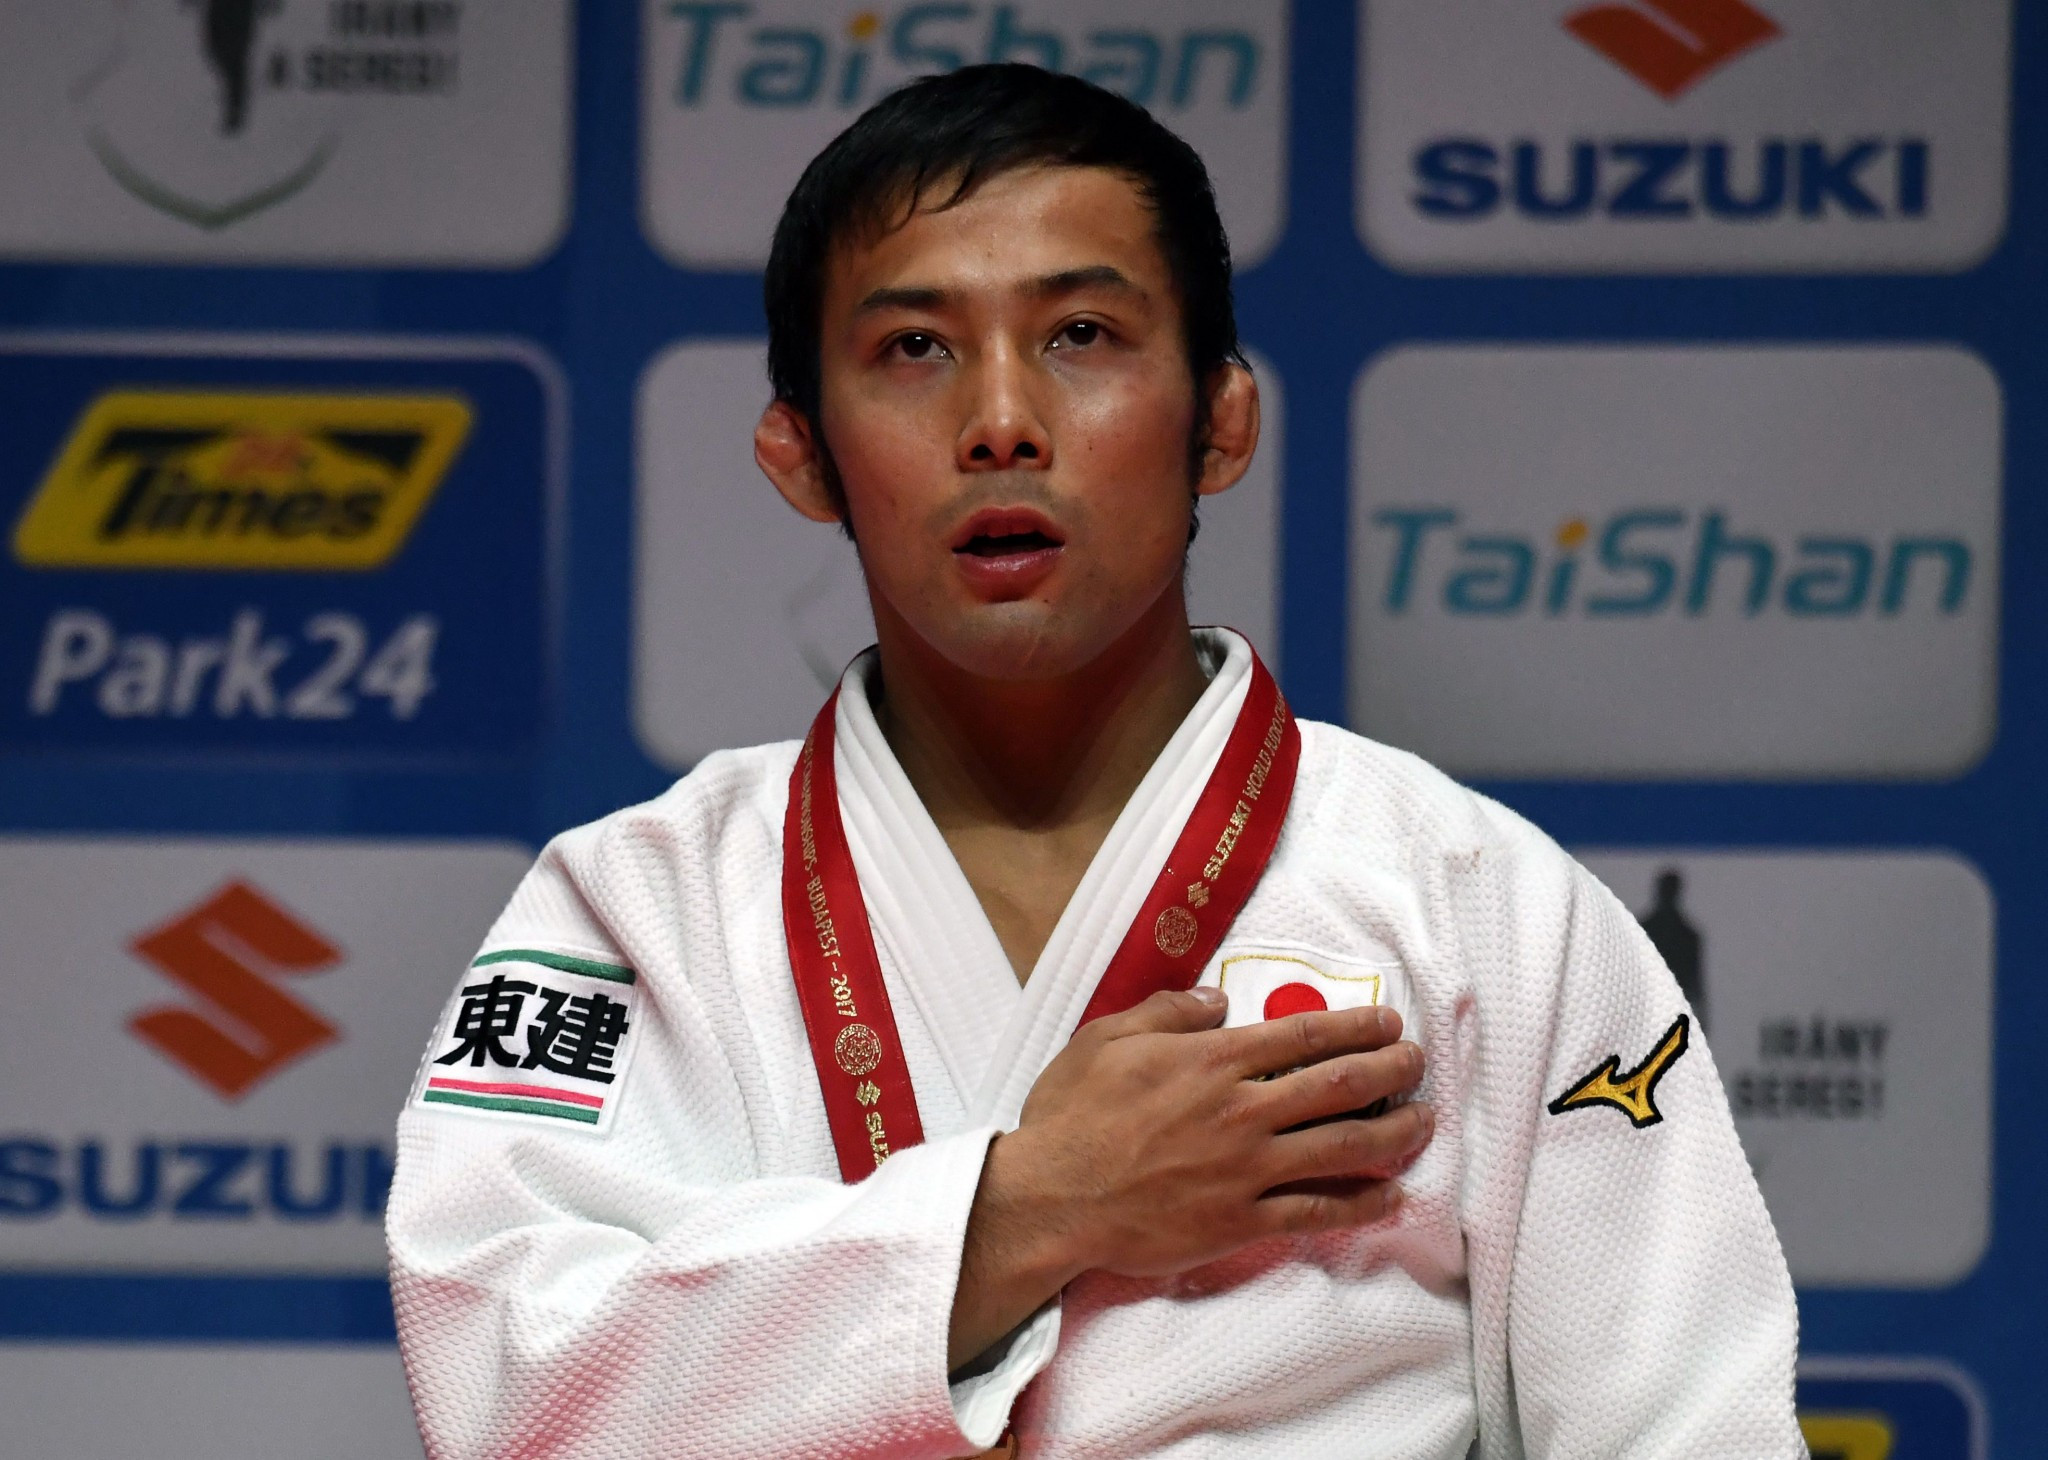 Japan demonstrate judo pedigree with two gold medals on opening day of IJF World Championships